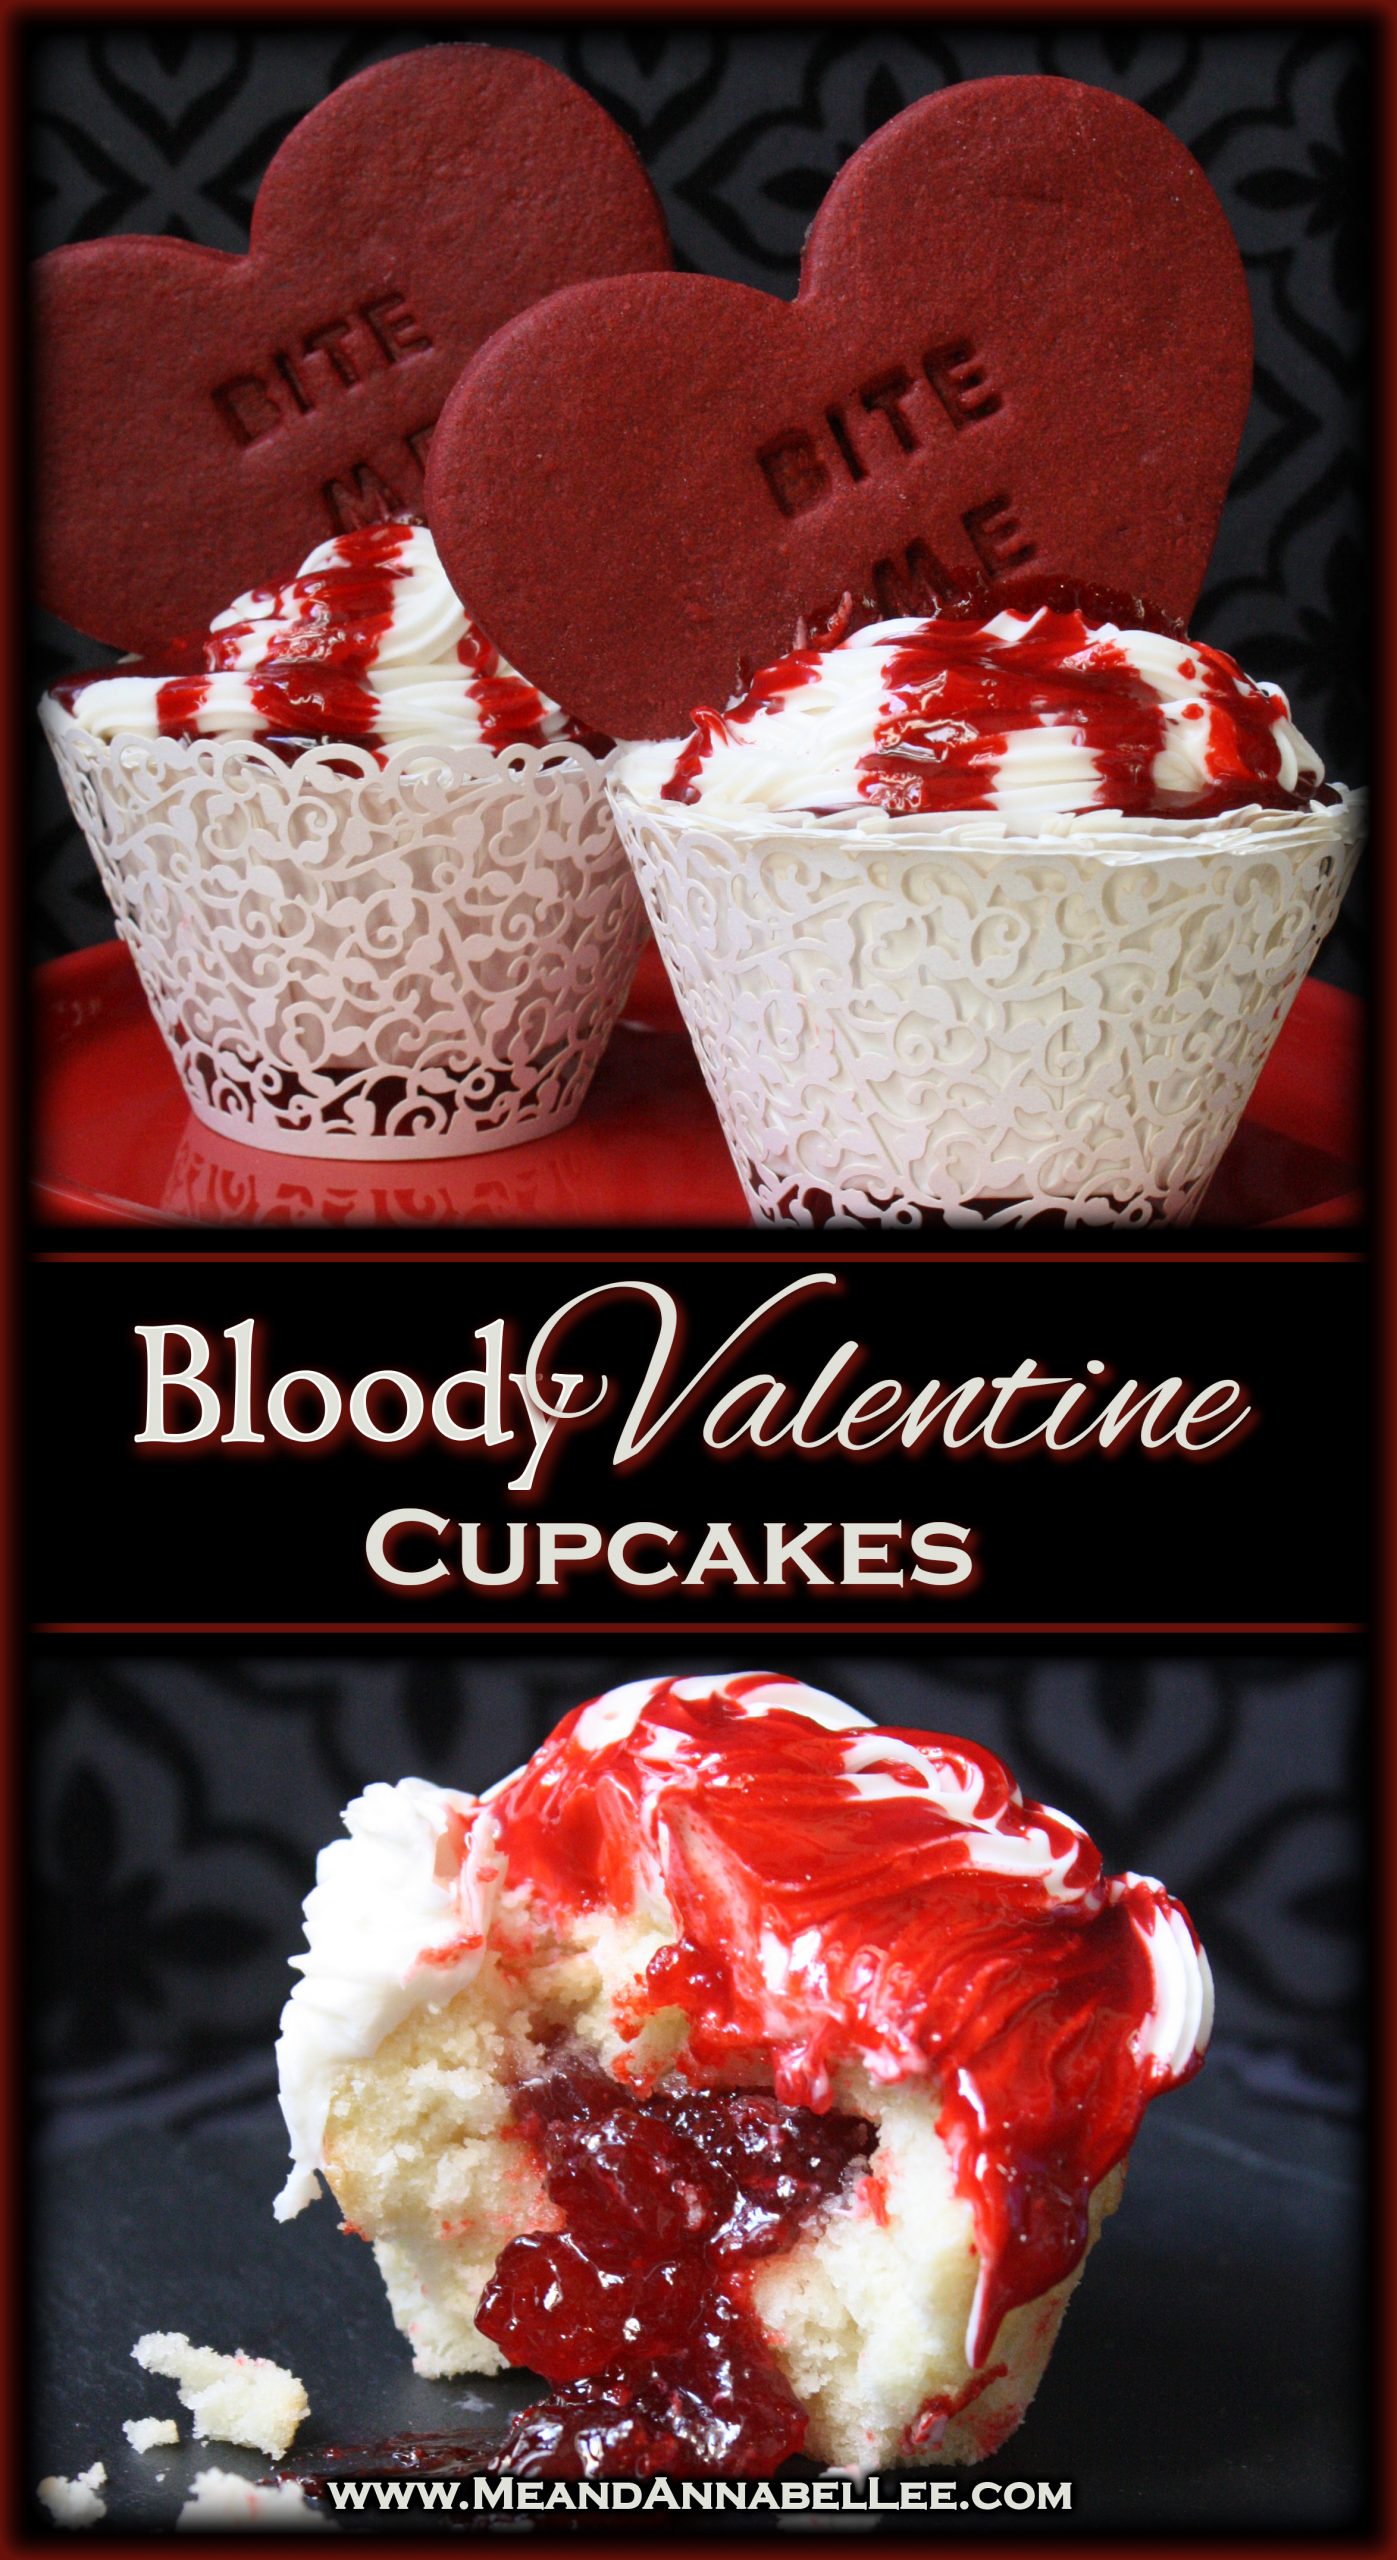 Bloody Anti Valentine Cupcake and Bite Me Conversation Heart Cookie Topper| Red Velvet Personalized Sugar Cookies paired with Bloody Raspberry filled Cupcakes…. Gothic Valentine’s Day Treats | Horror food | Me and Annabel Lee